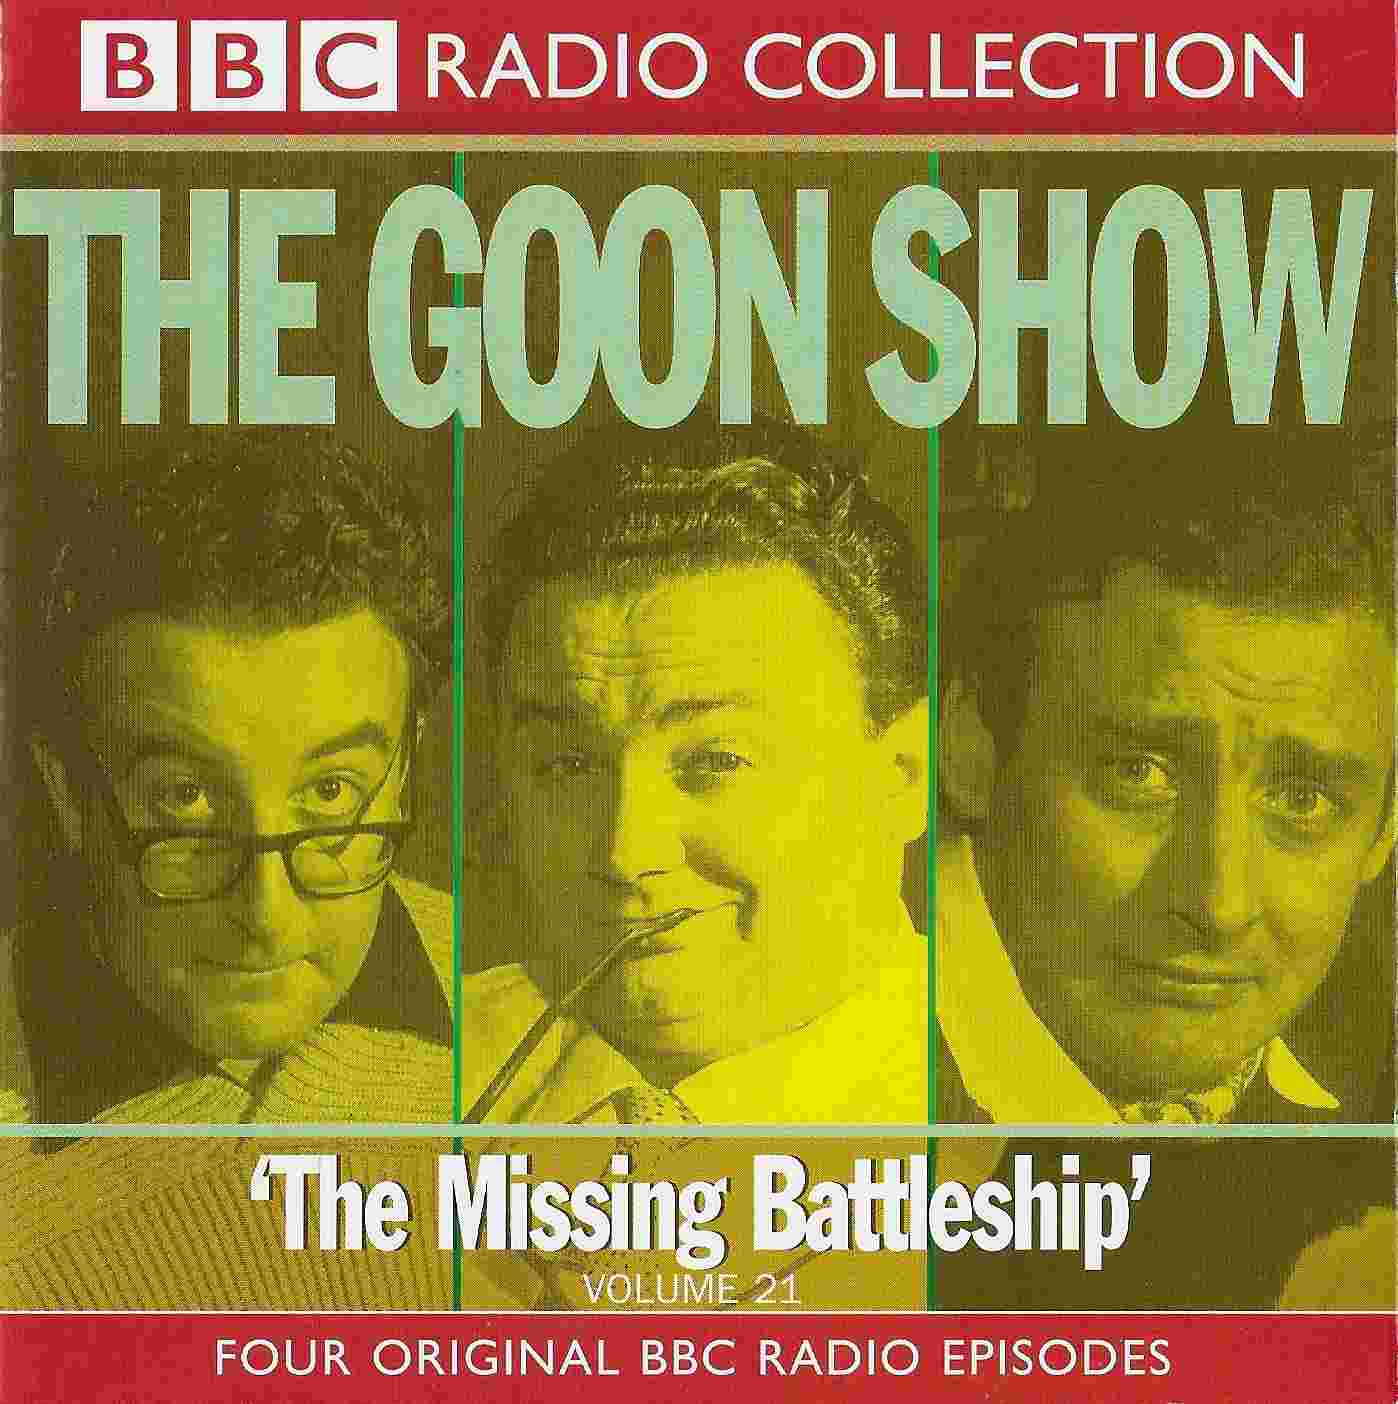 Picture of ISBN 0-563-49479-4 The Goon show 21 - The missing battleship by artist Spike Milligan / Larry Stephens from the BBC cds - Records and Tapes library